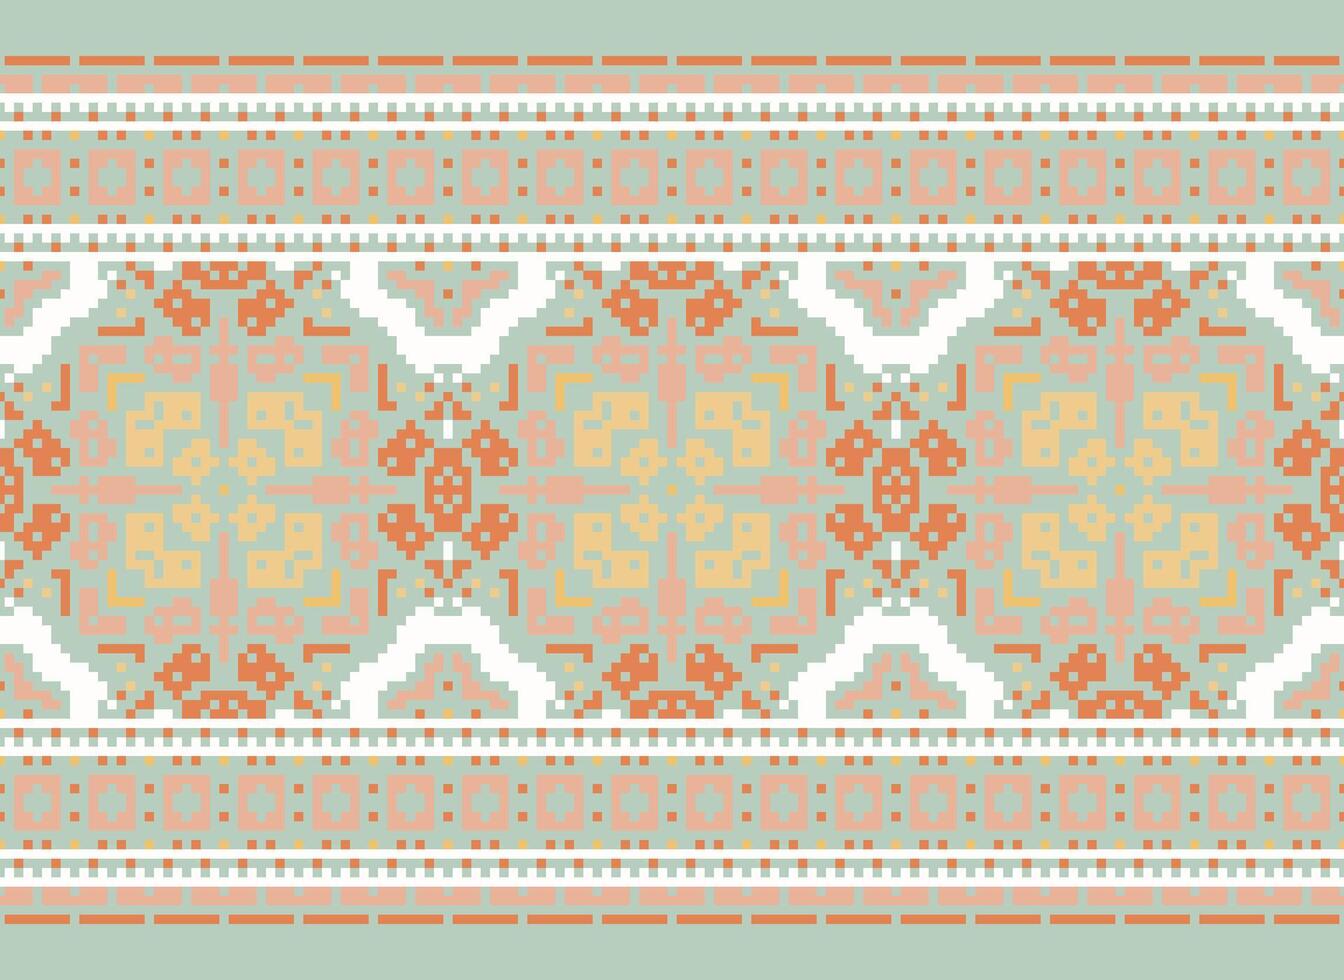 Ethnic geometric fabric pattern Cross Stitch.Ikat embroidery Ethnic oriental Pixel pattern blue background. Abstract,vector,illustration. Texture,clothing,frame,decoration,motifs,silk wallpaper. vector